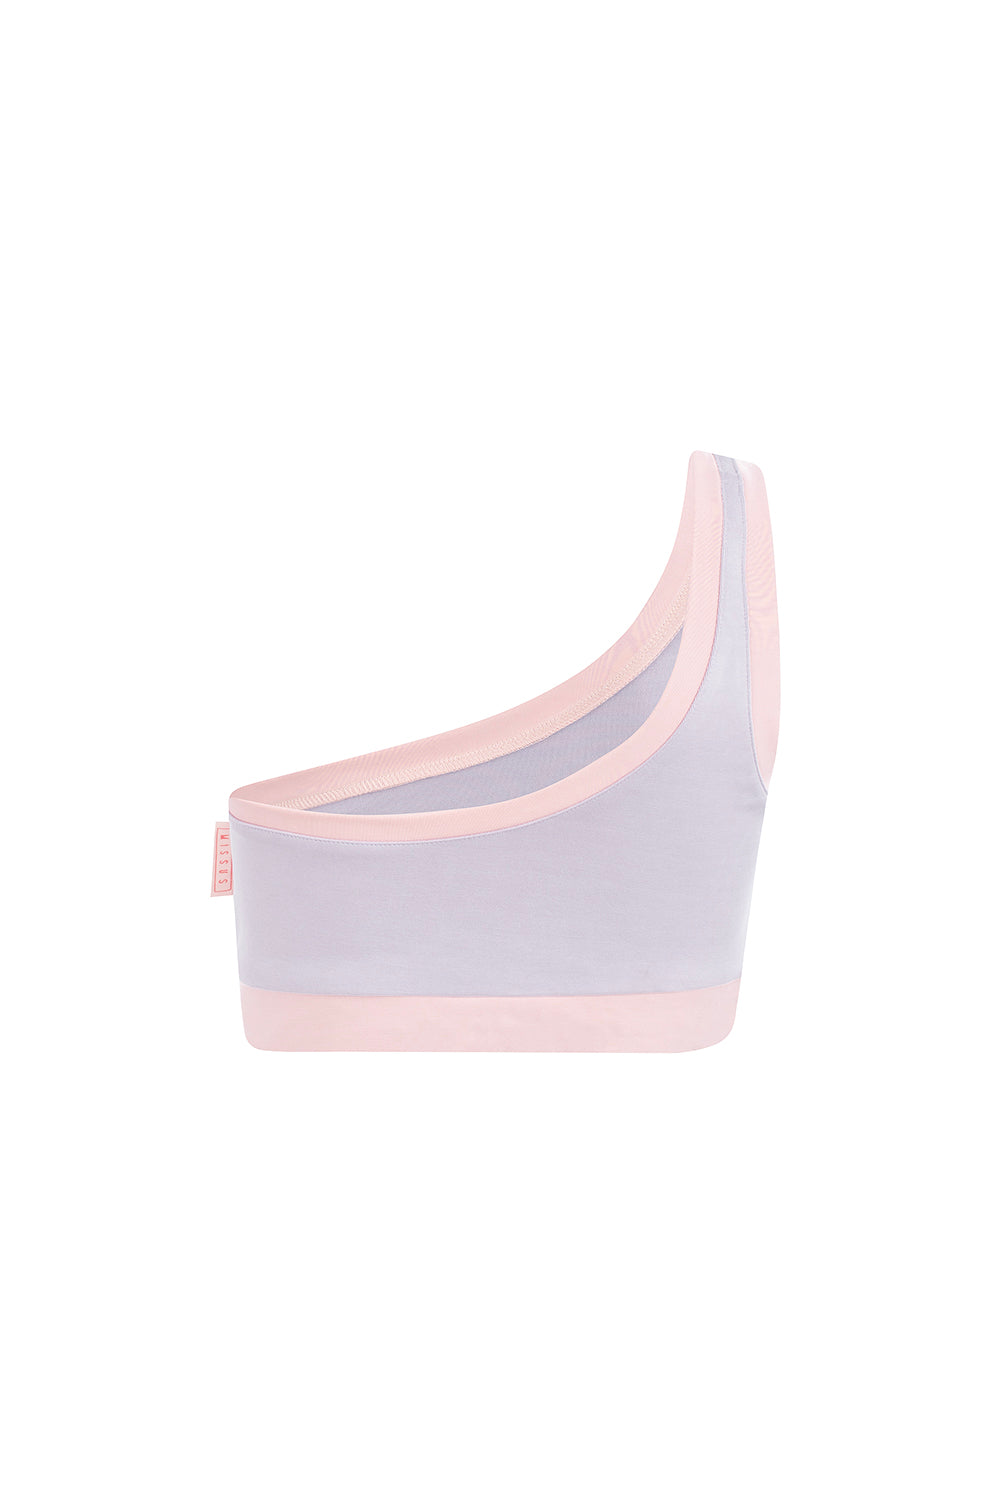 SOFT TOUCH ONE SHOULDER LILAC CROP TOP V2